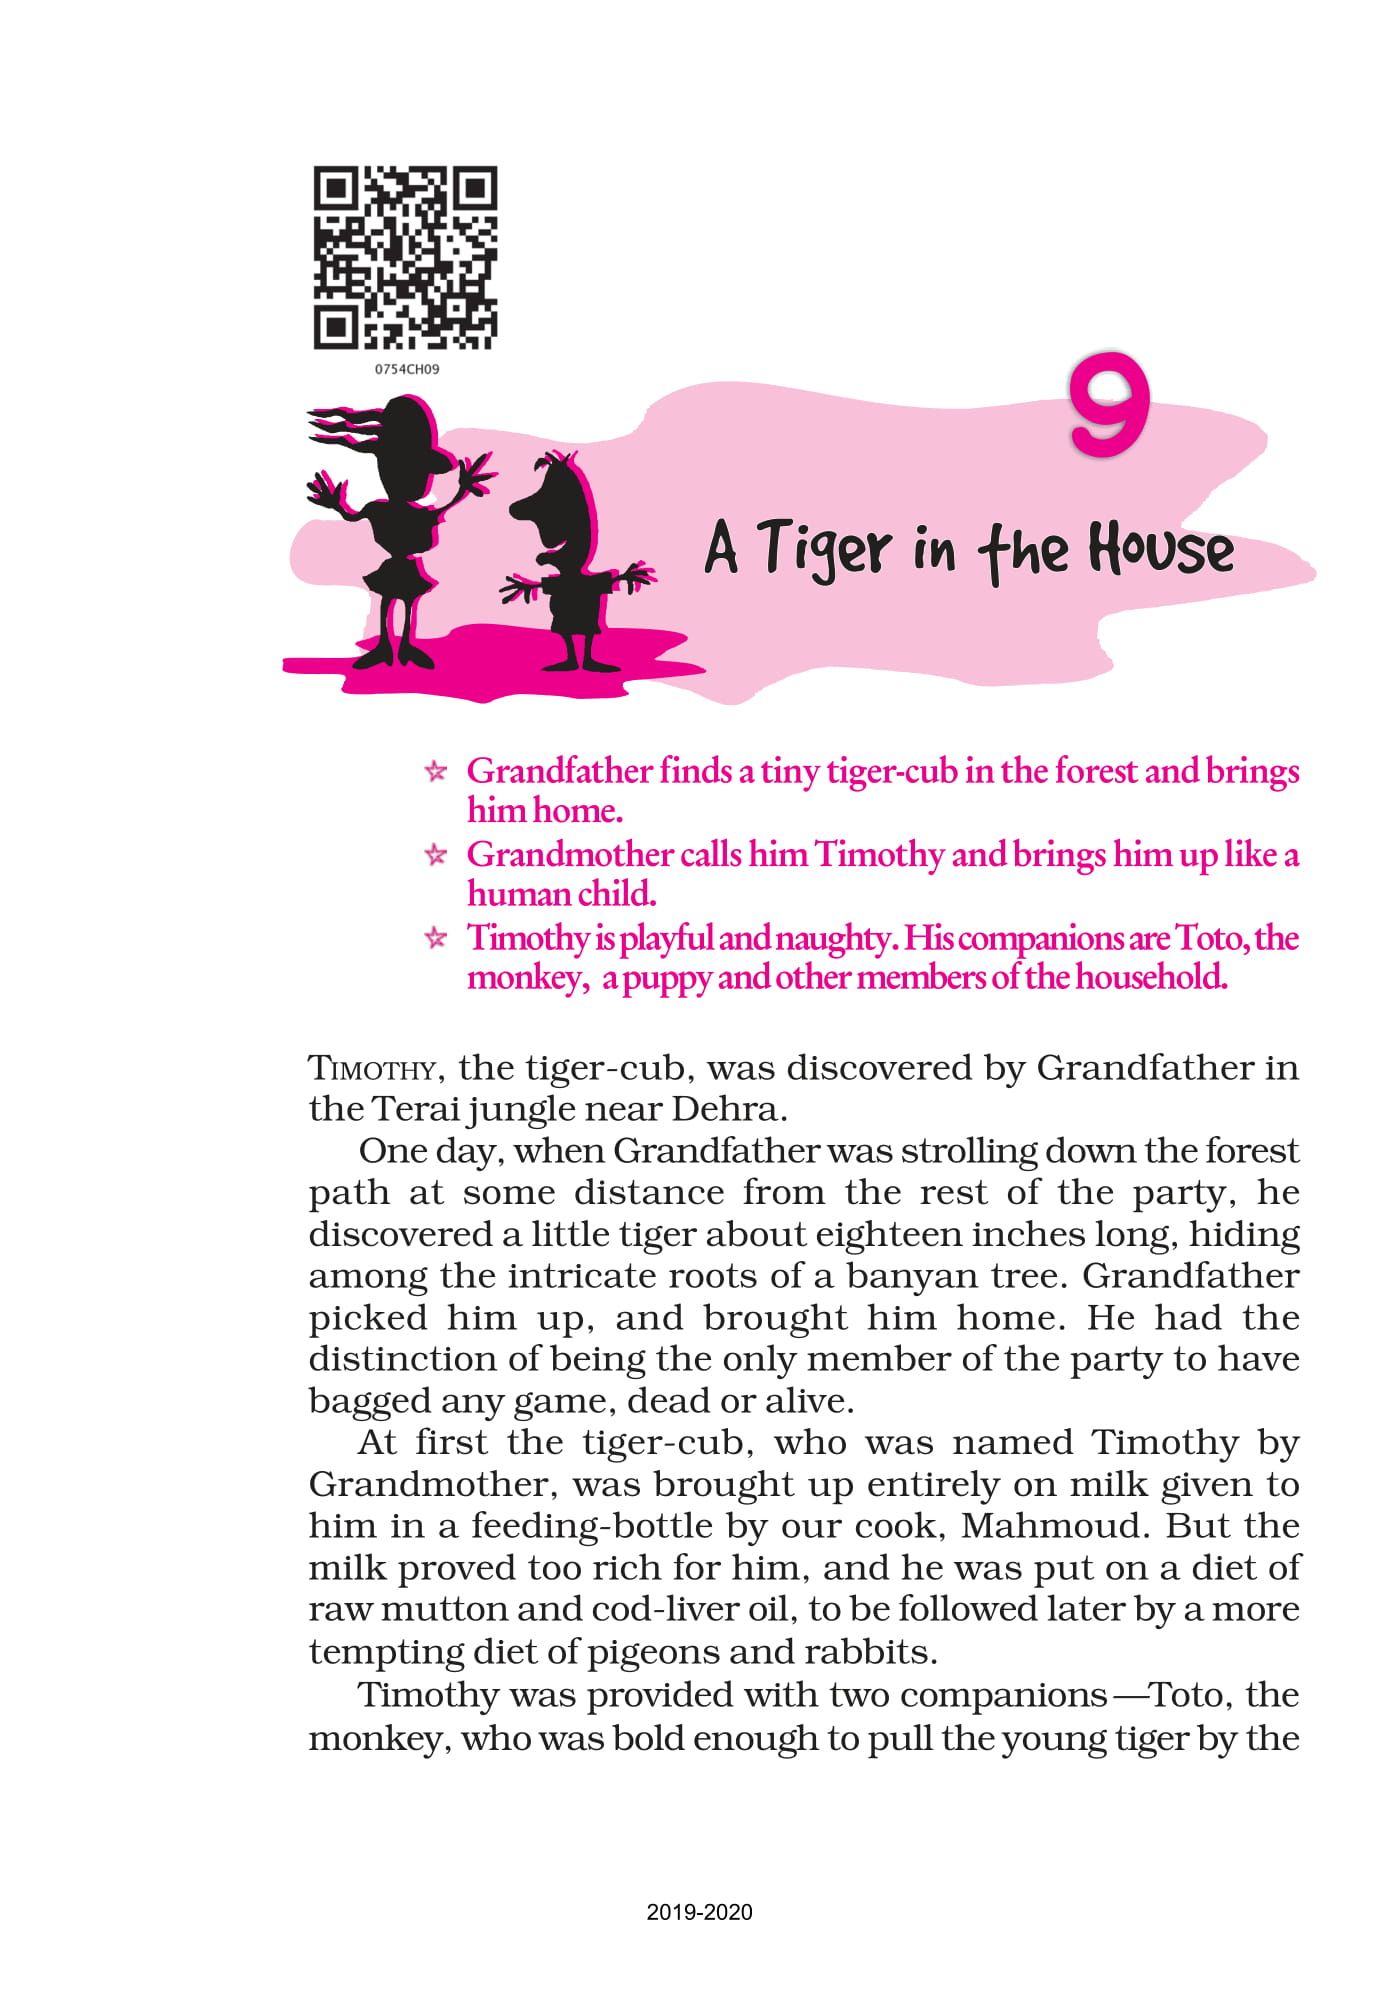 NCERT Book Class 7 English (The Alien Hand) Chapter 9 A Tiger in the House - Page 1